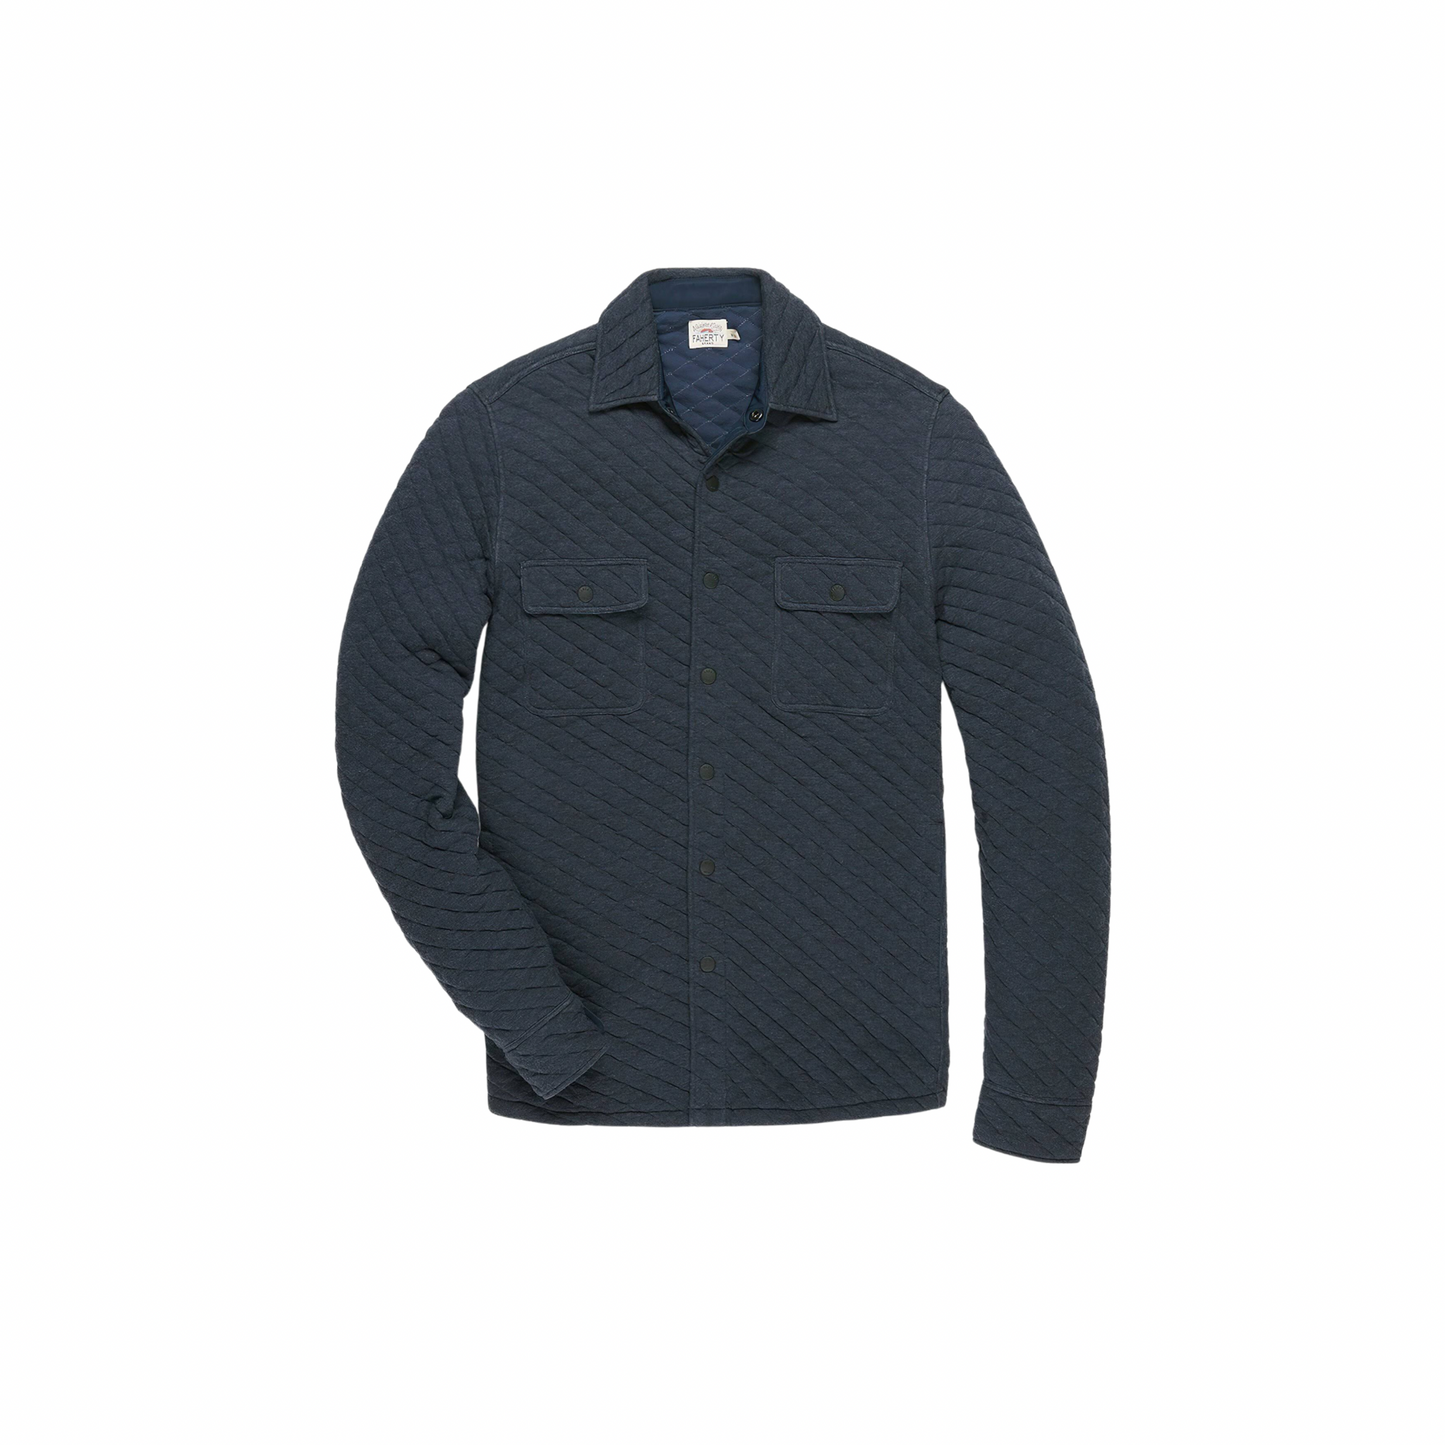 Epic Quilted Fleece CPO